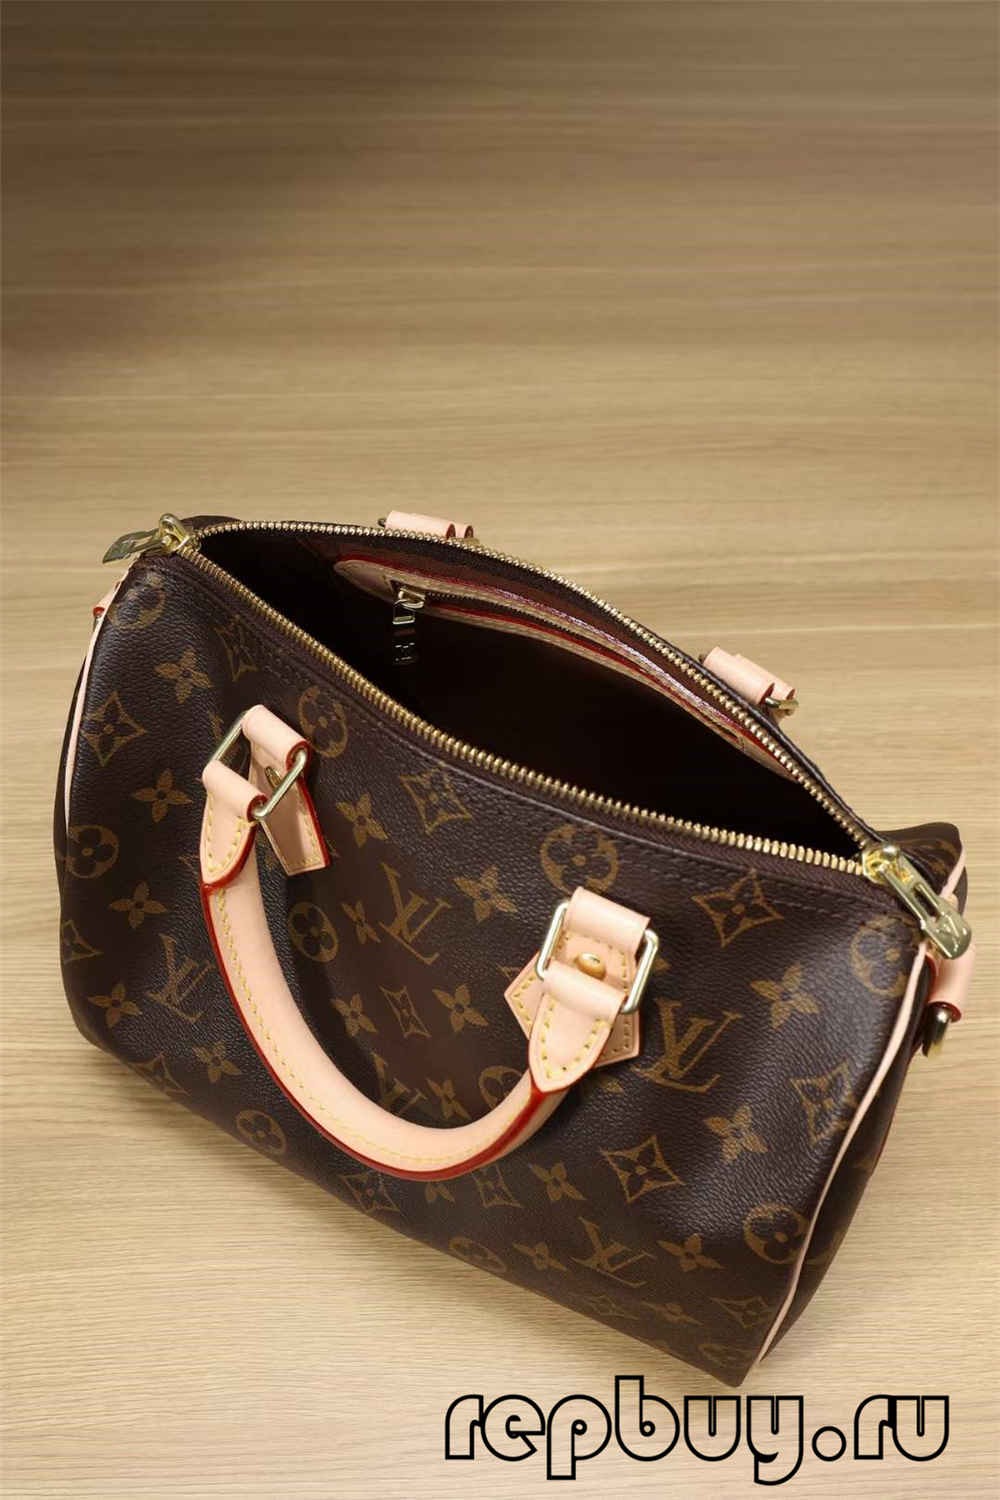 Best quality Louis Vuitton Speedy 25 bag replica online shopping （2022 updated）-Best Quality Fake Louis Vuitton Bag Online Store, Replica designer bag ru